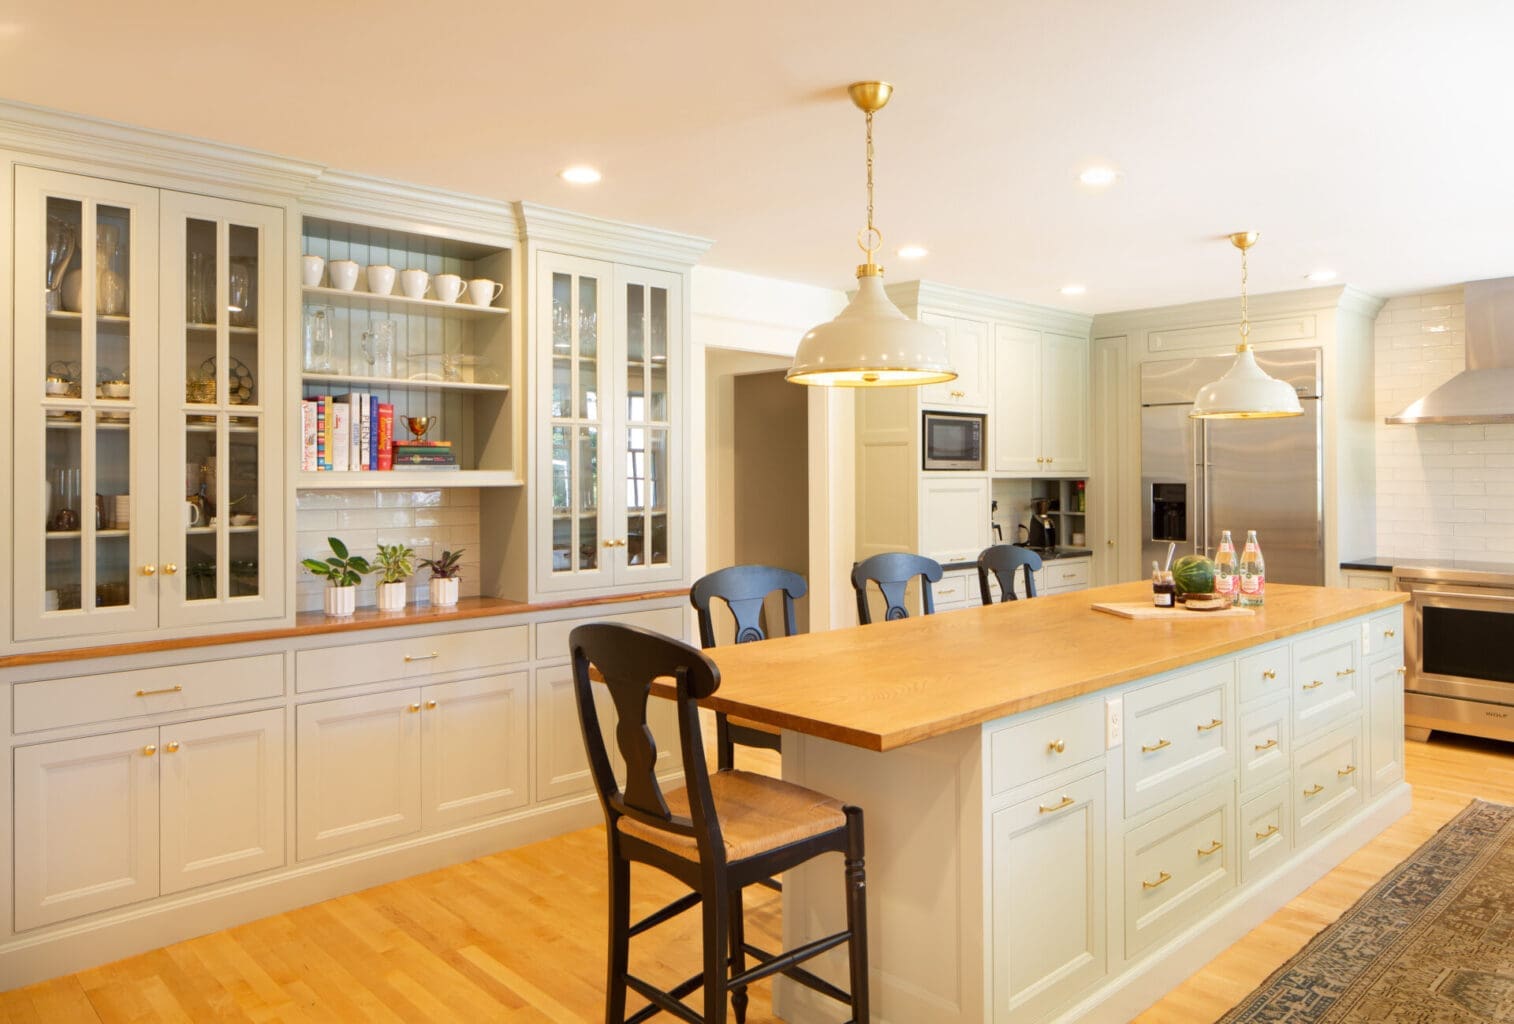 Photo of a classic grey-teal kitchen with shaker-style cabinets, brass hardware, wooden and stone countertops, and an island.